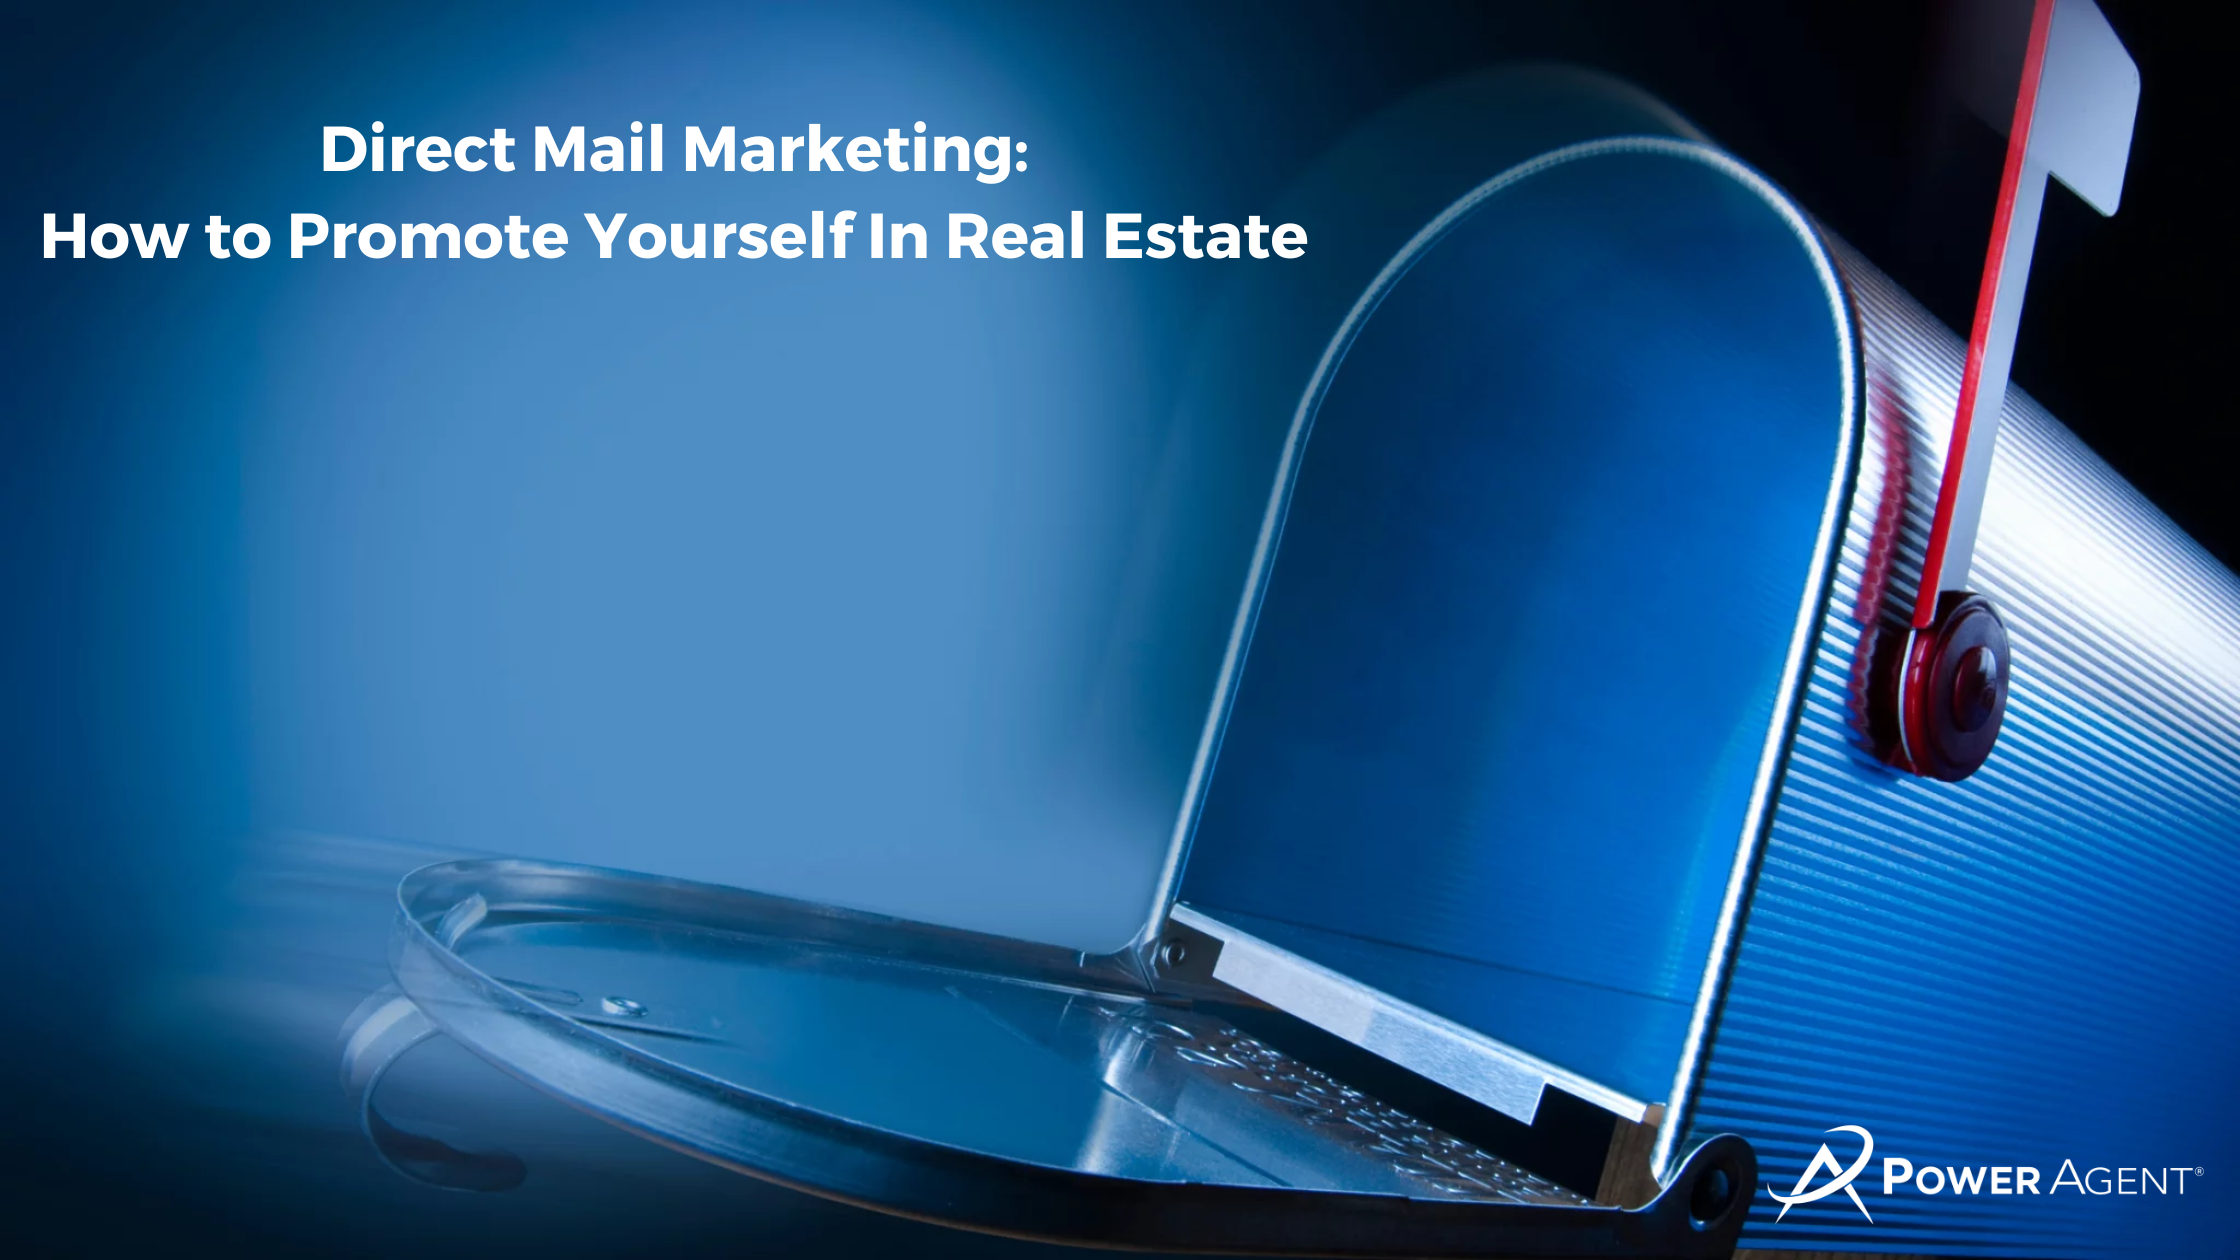 Direct Mail Marketing: How to Promote Yourself In Real Estate